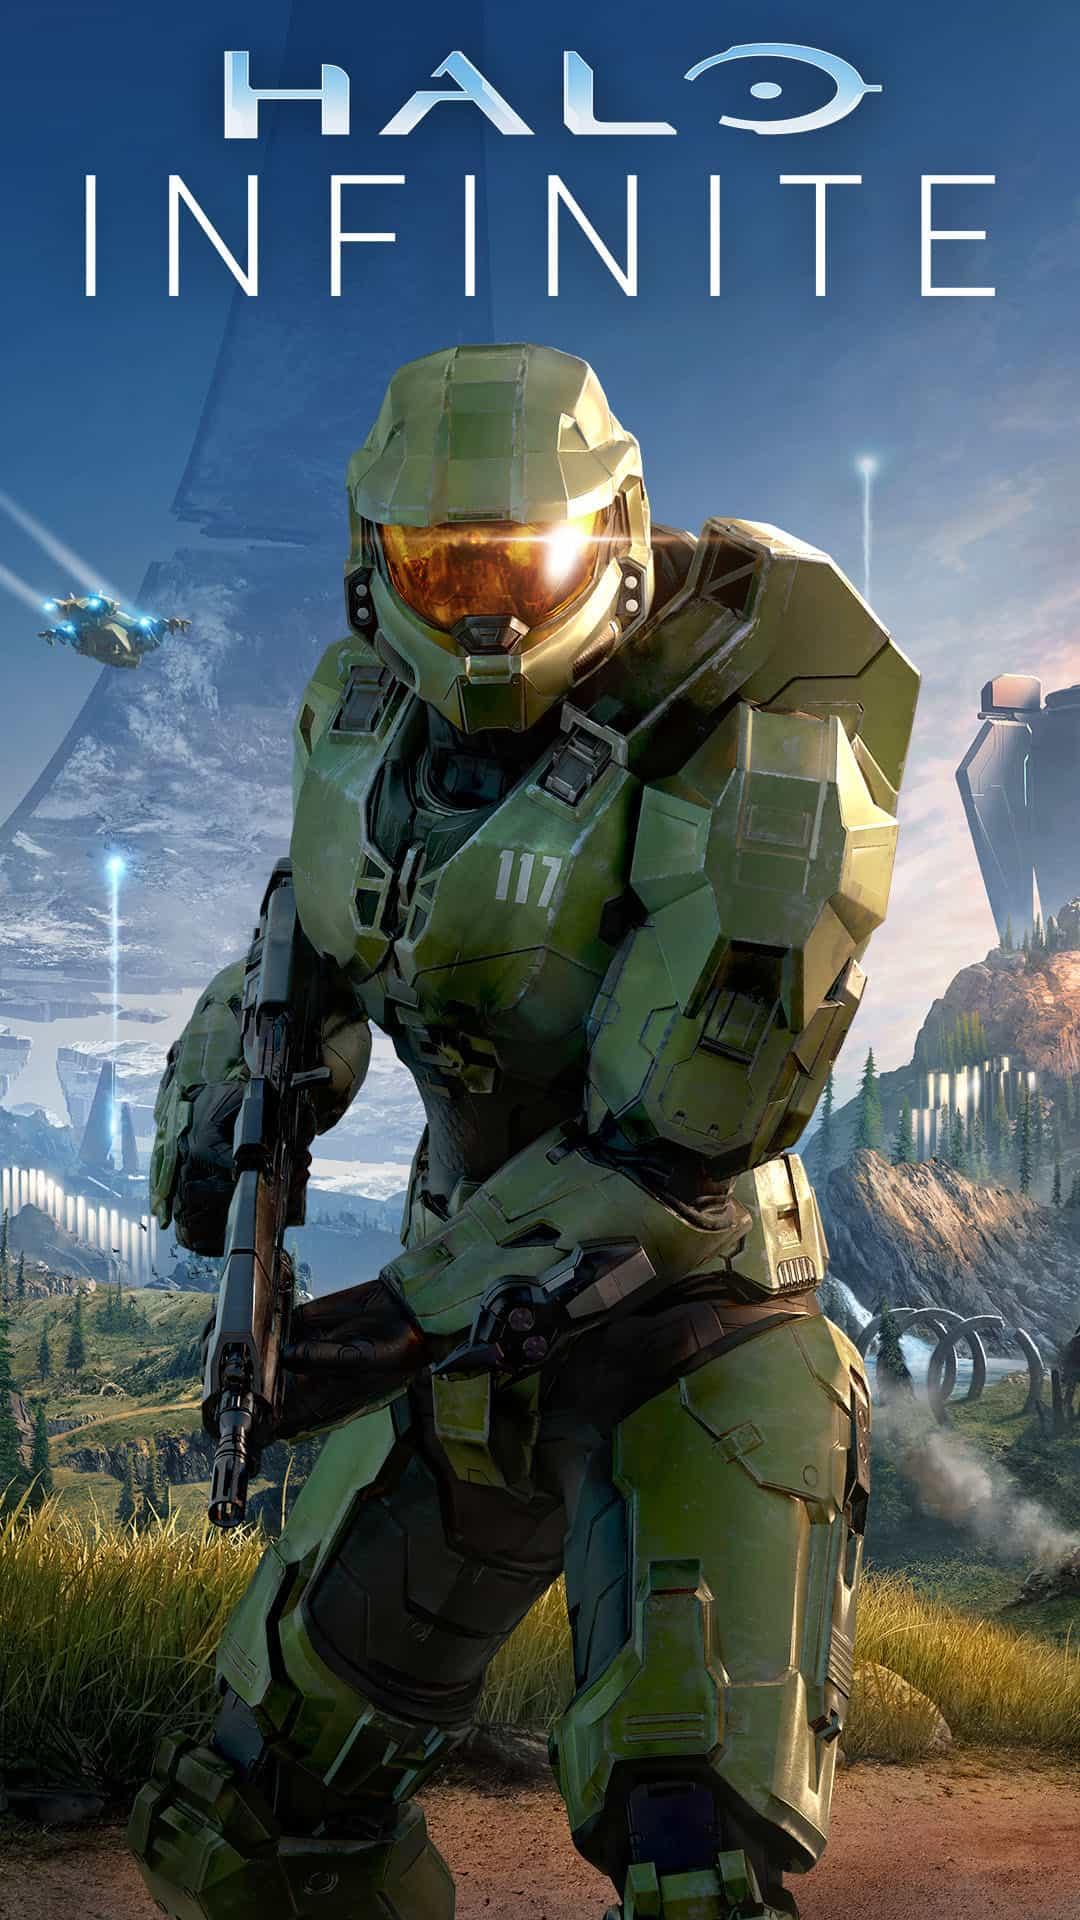 1080 x 1920 · jpeg - Halo Infinite | 4K wallpapers, free and easy to download